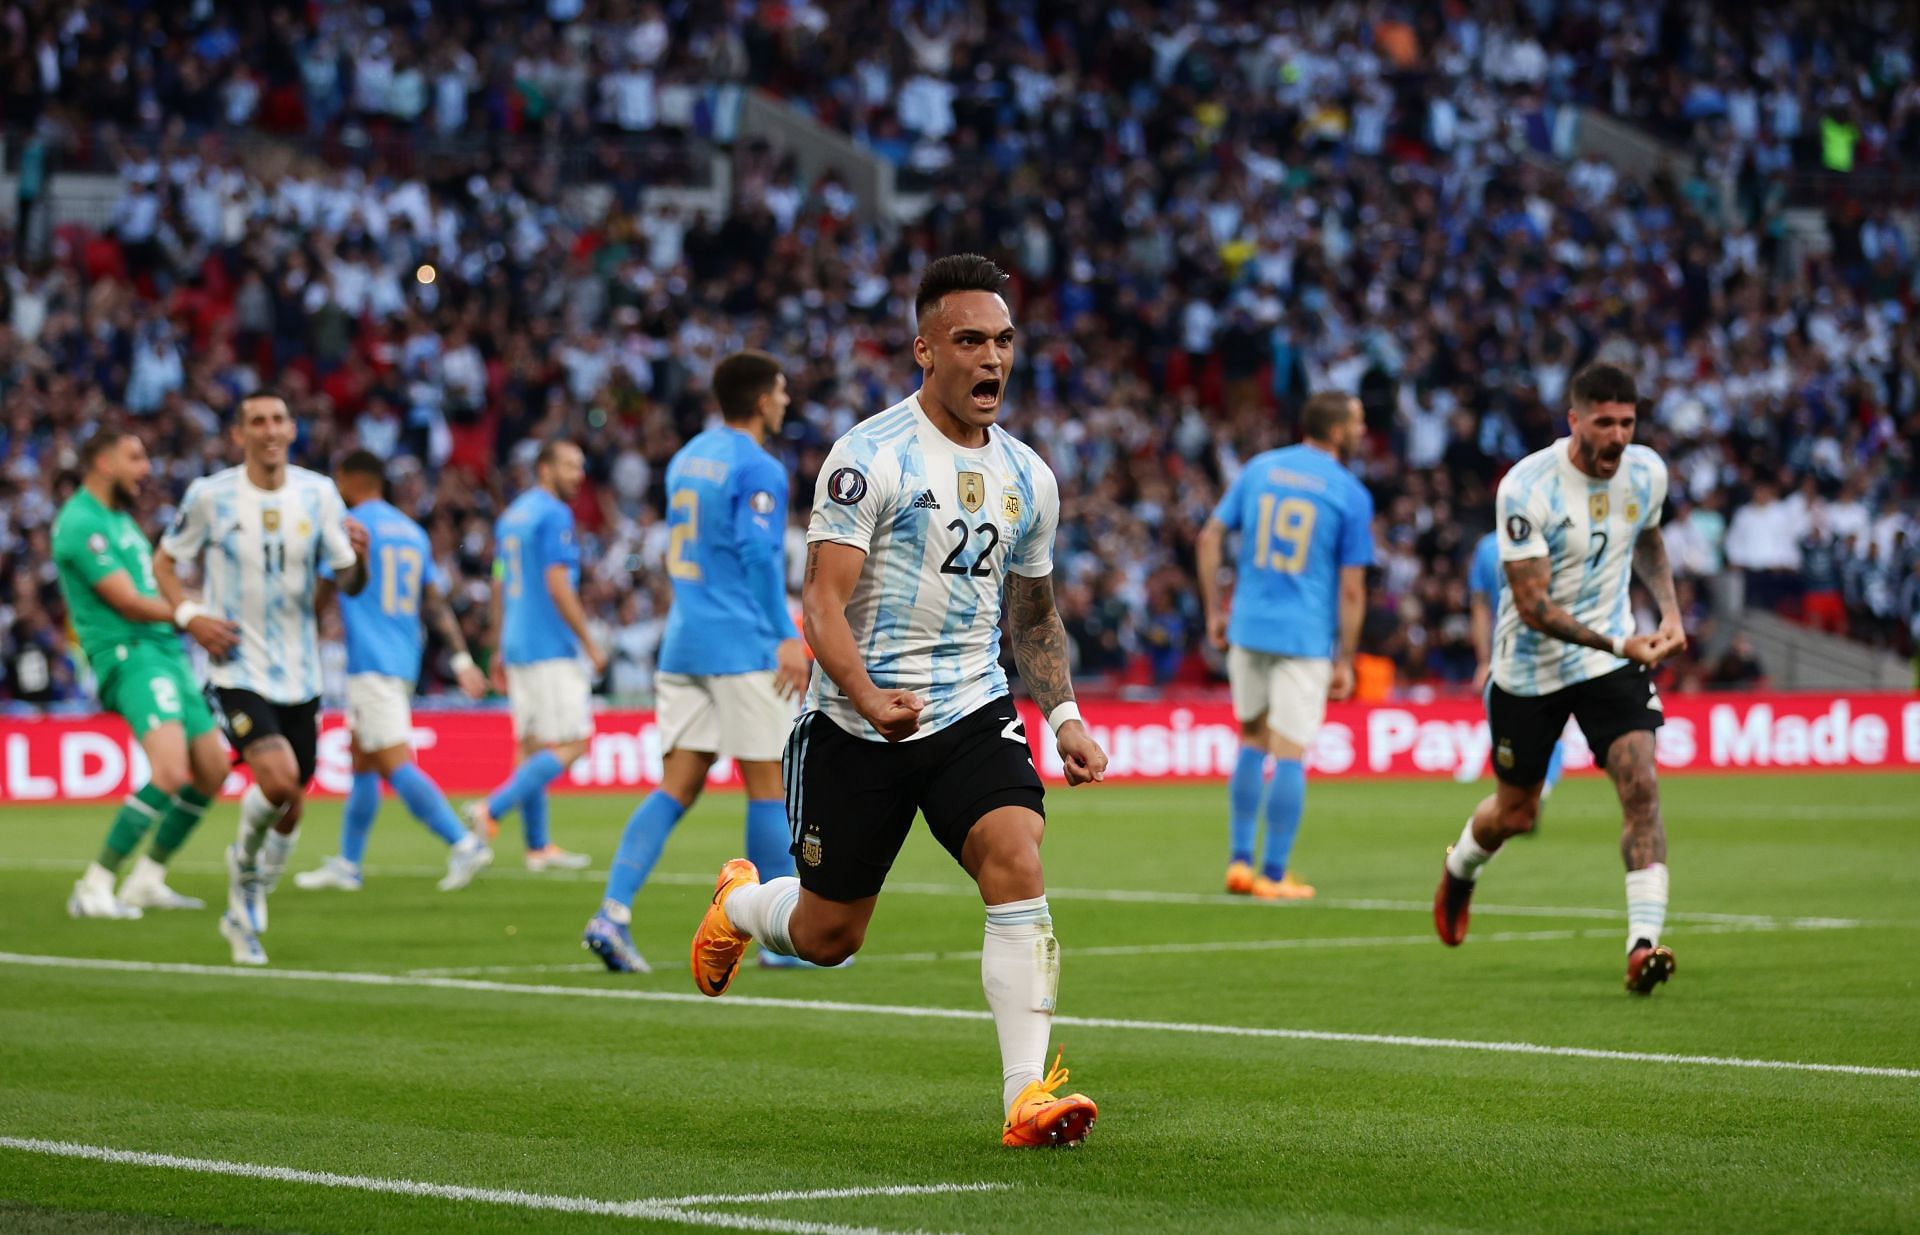 Lautaro Martinez could lead the line for Argentina at the 2022 FIFA World Cup